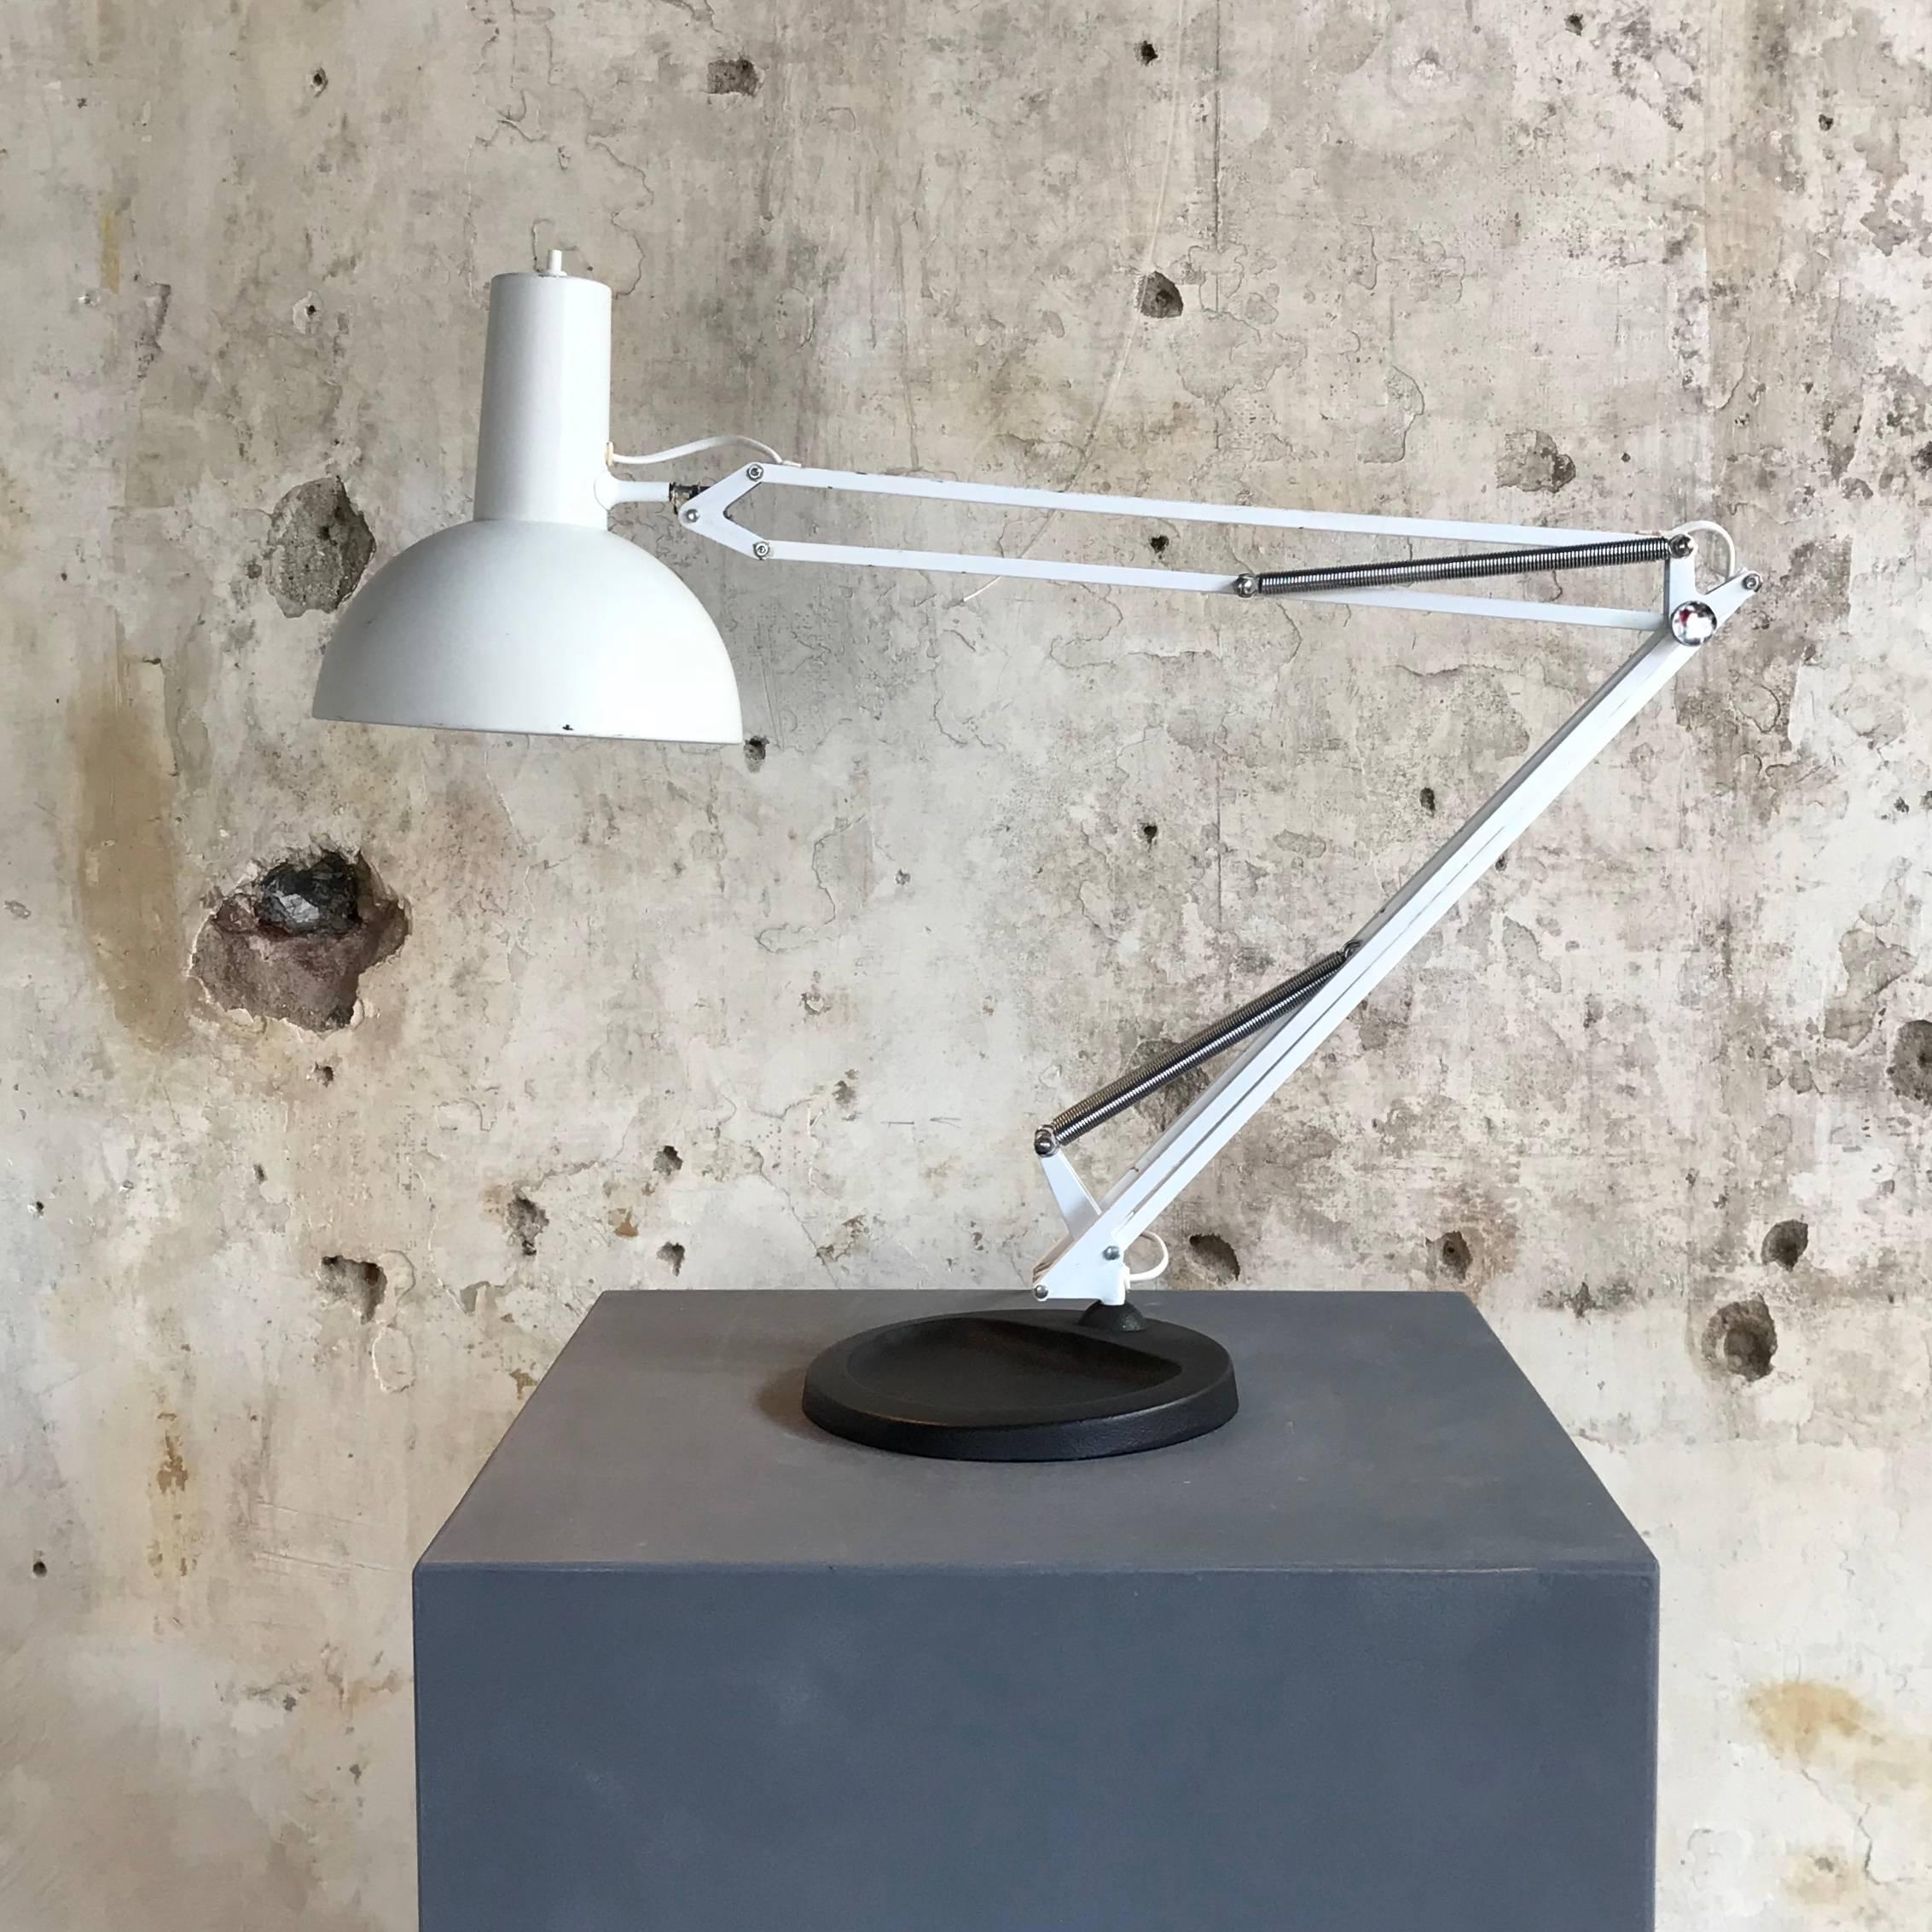 Vintage, industrial and large desk or floor lamp, often referred to as 'The Ghost of PH' and based on the Ideas of Poul Henningsen. These fully adjustable white anglepoise desk or floor Lamp was designed in-house at Louis Poulsen in the early 1970s.